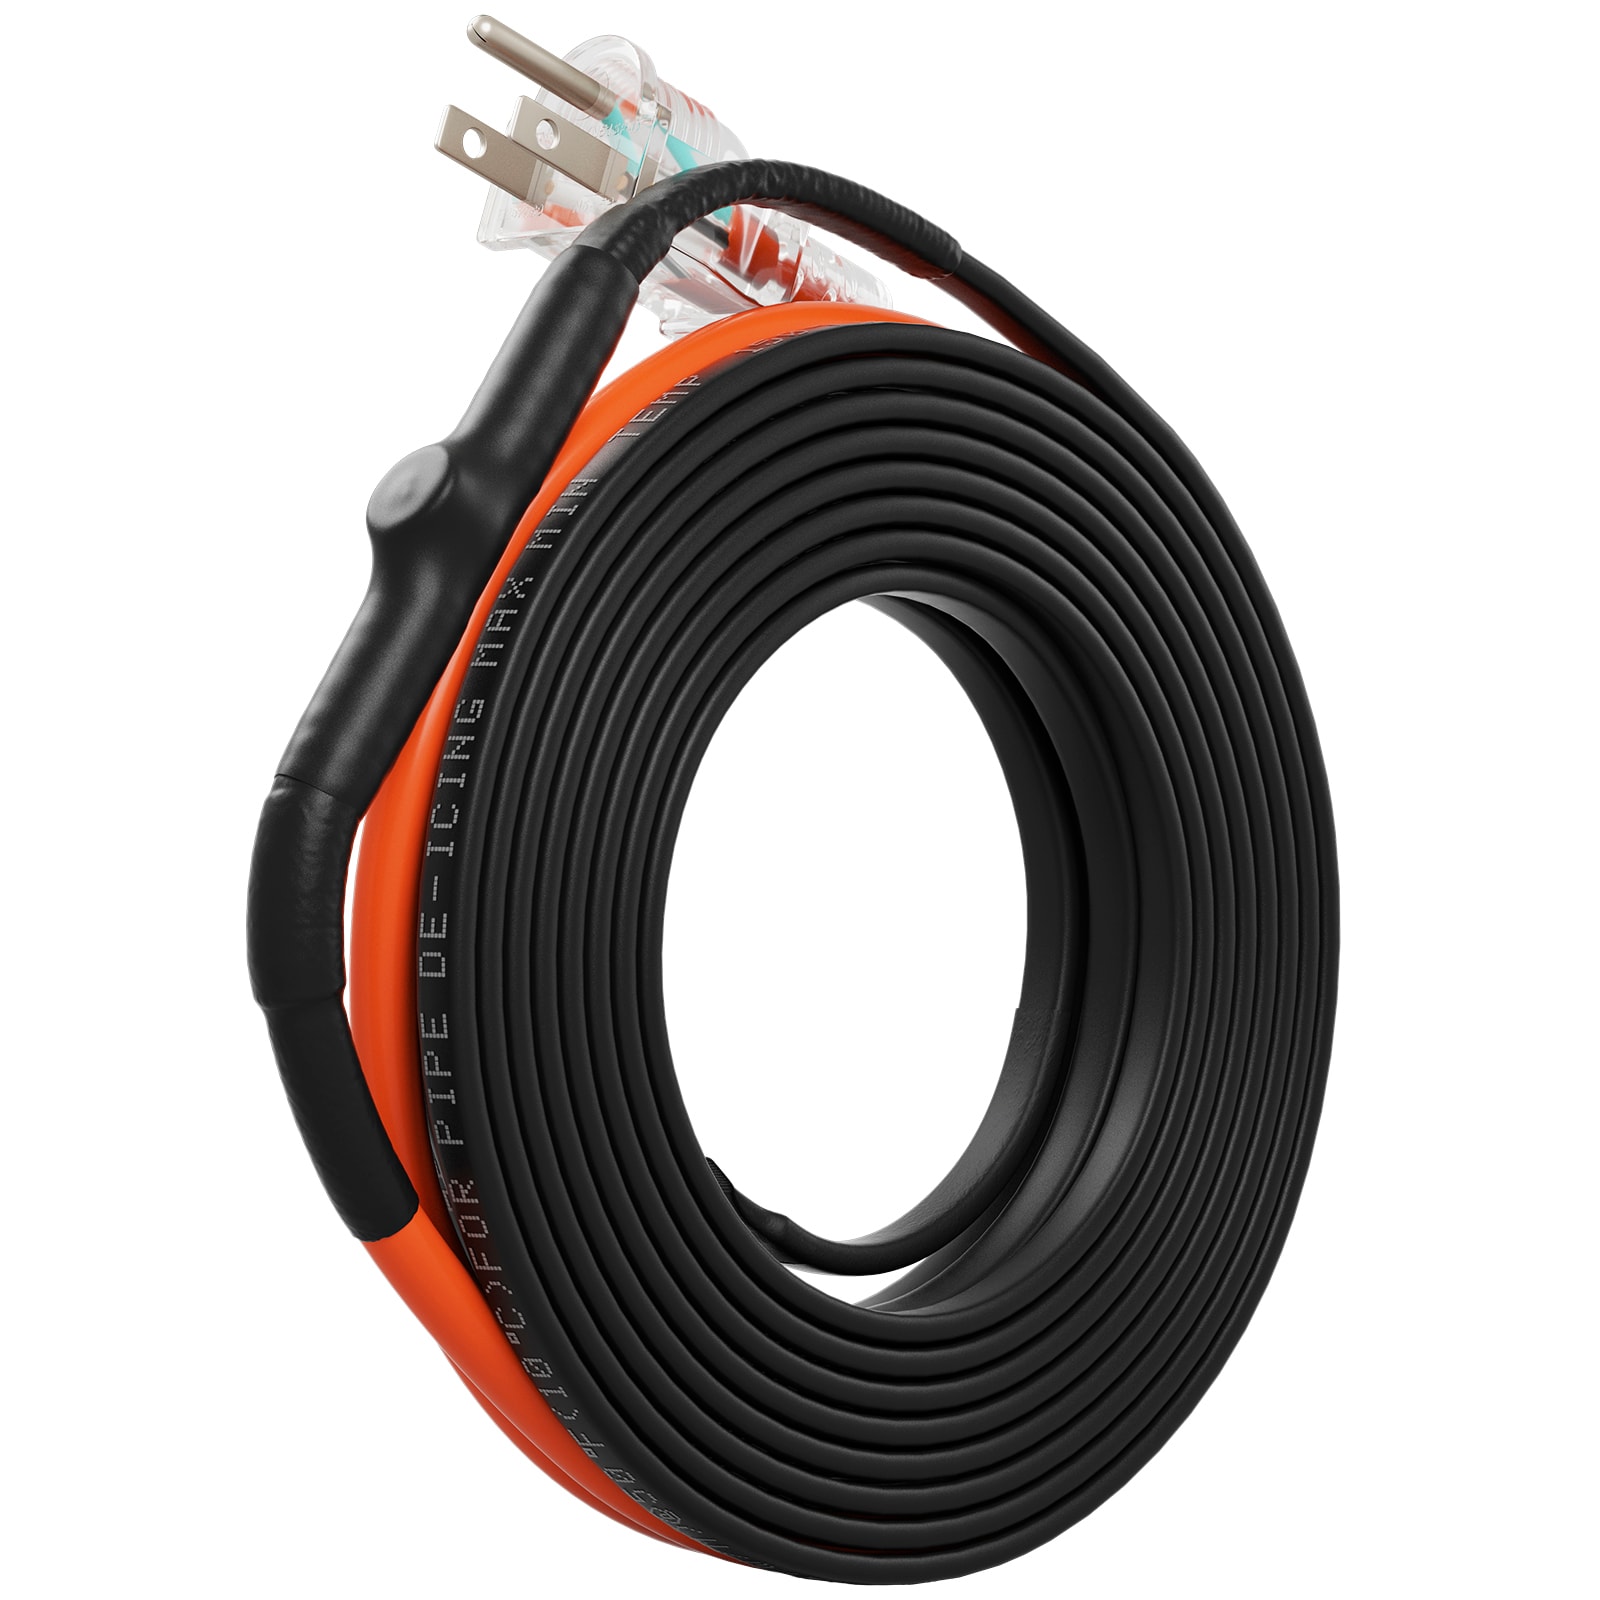 VEVOR 30 ft. Pipe Heat Cable 5W/ft. Self-Regulating Heat Tape IP68 110Volt  with Build-in Thermostat for PVC Metal Plastic Hose ZDWGDJRDLDGWQKAKDV1 -  The Home Depot